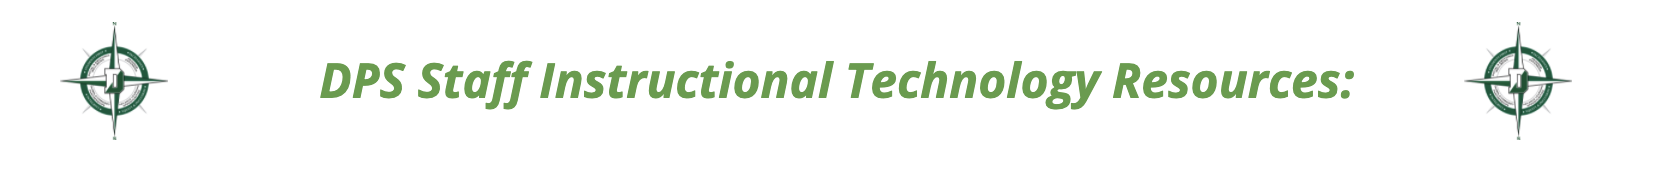 DPS Instructional Technology Resources